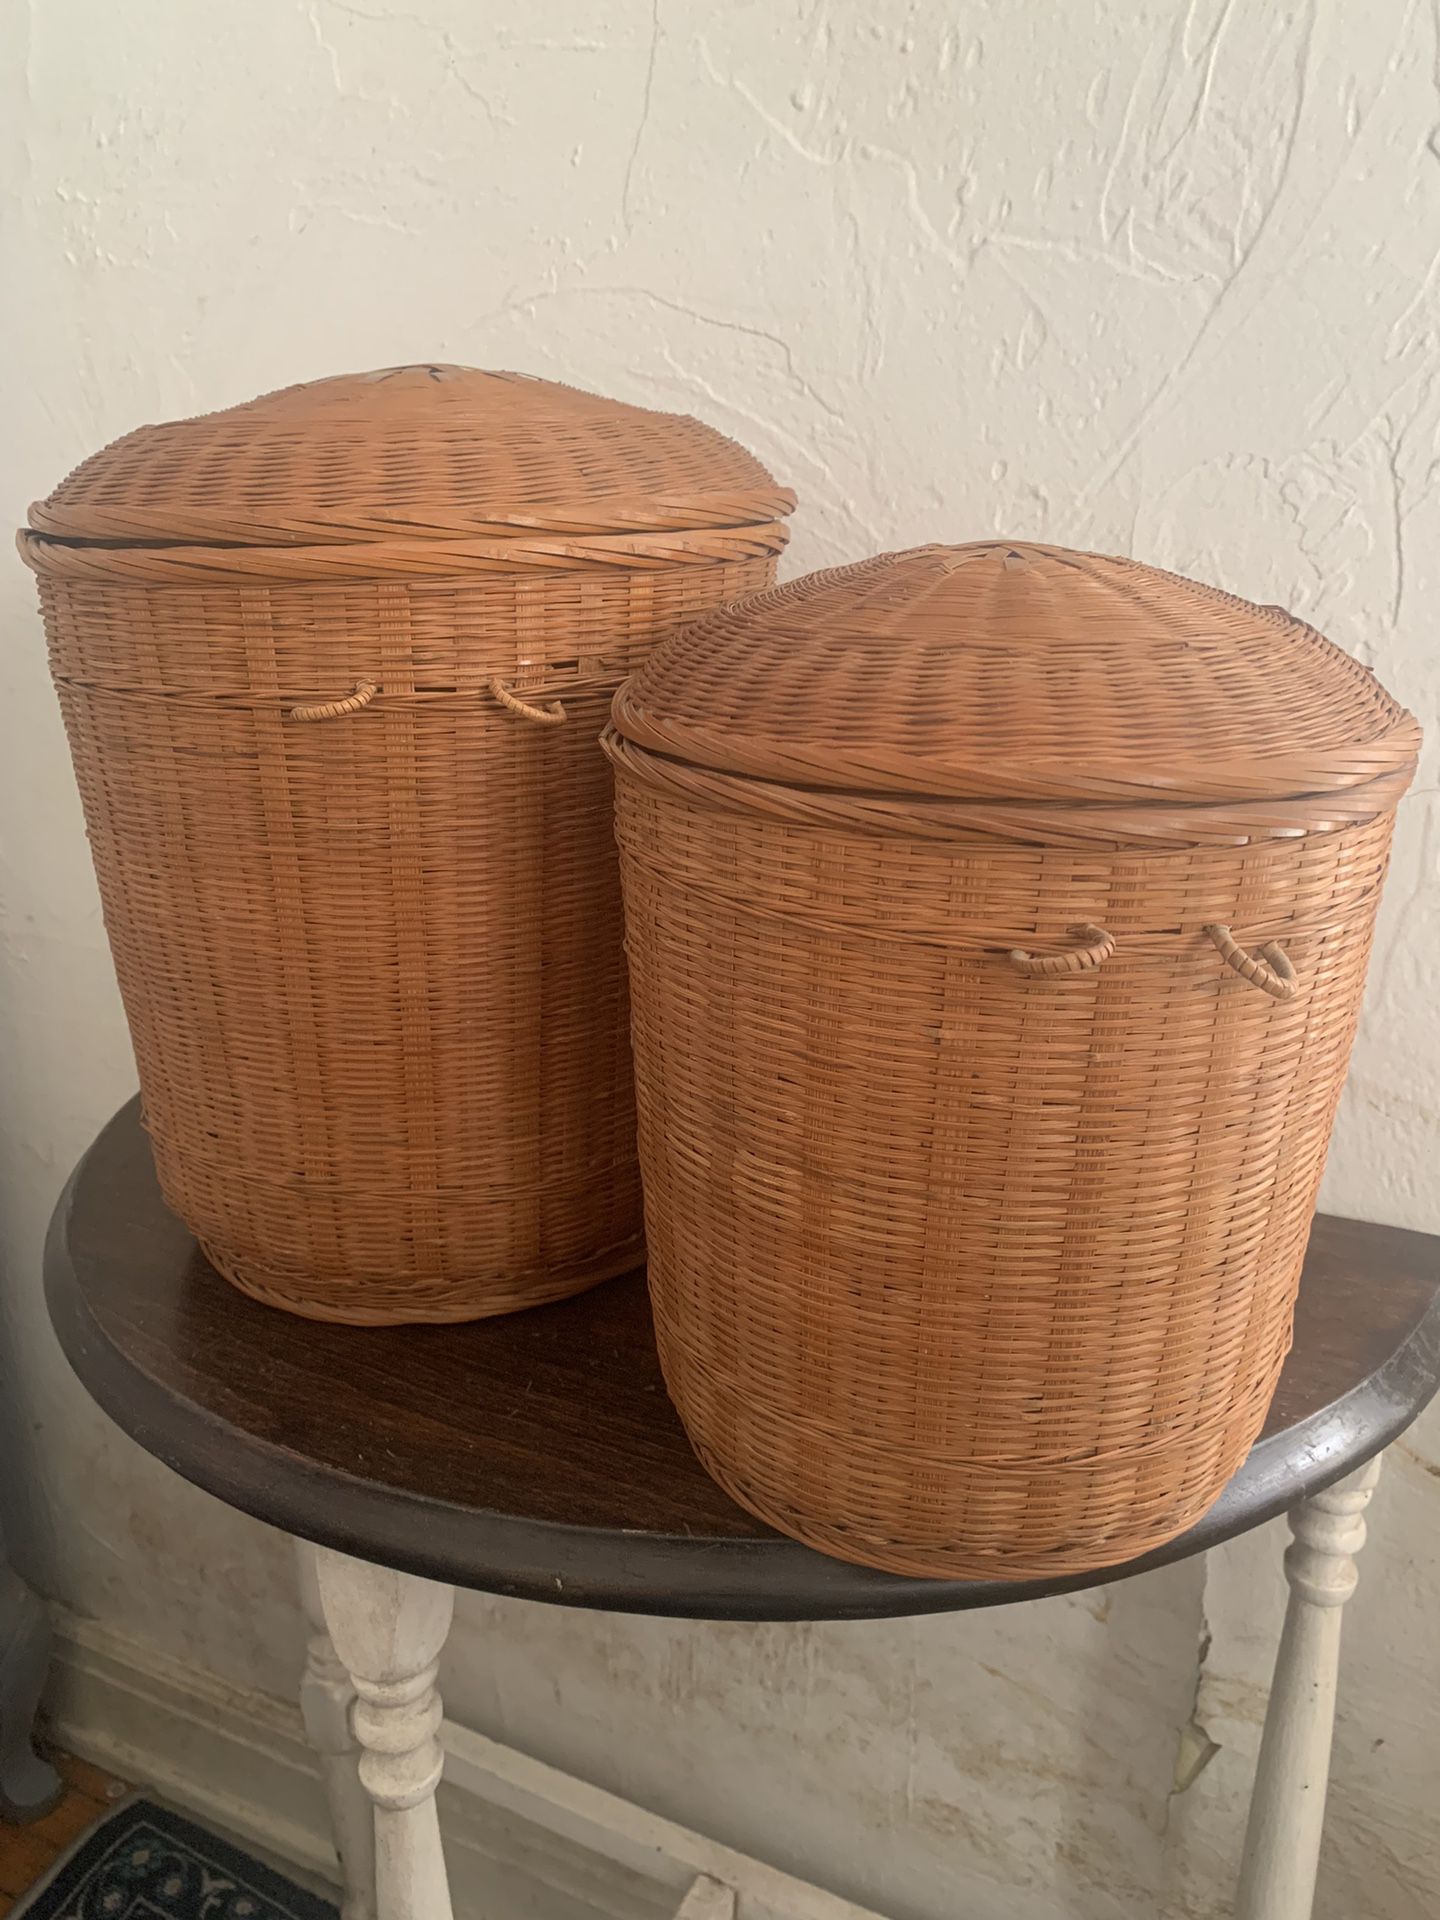 Set of 2 Woven Storage Baskets with Lid Imported